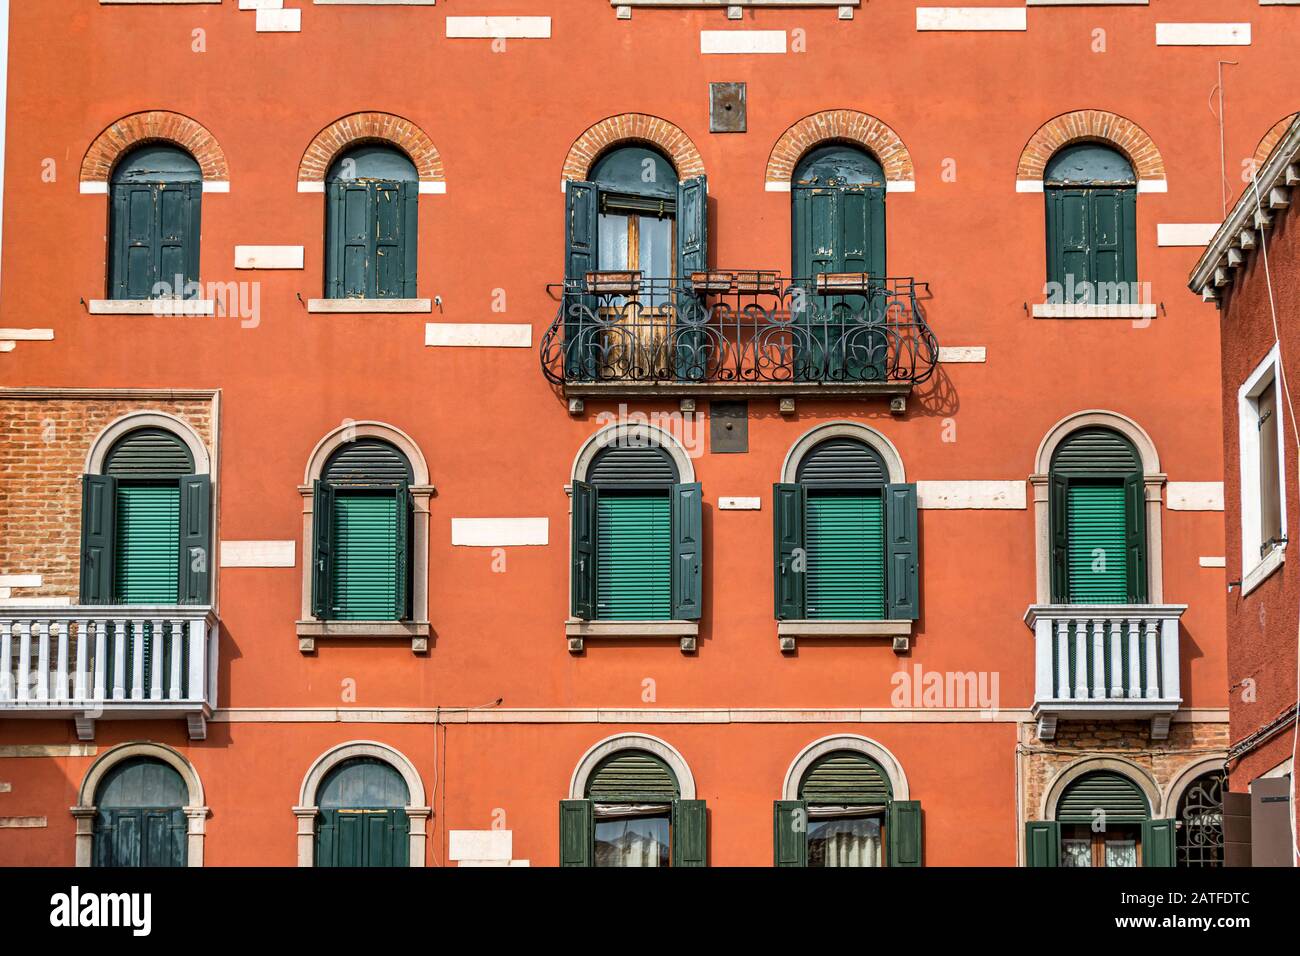 Close up of an orange coloured building with a wrought iron balcony and green shutters and windows with blinds in  C. Cappuccine Castello ,Venice Stock Photo